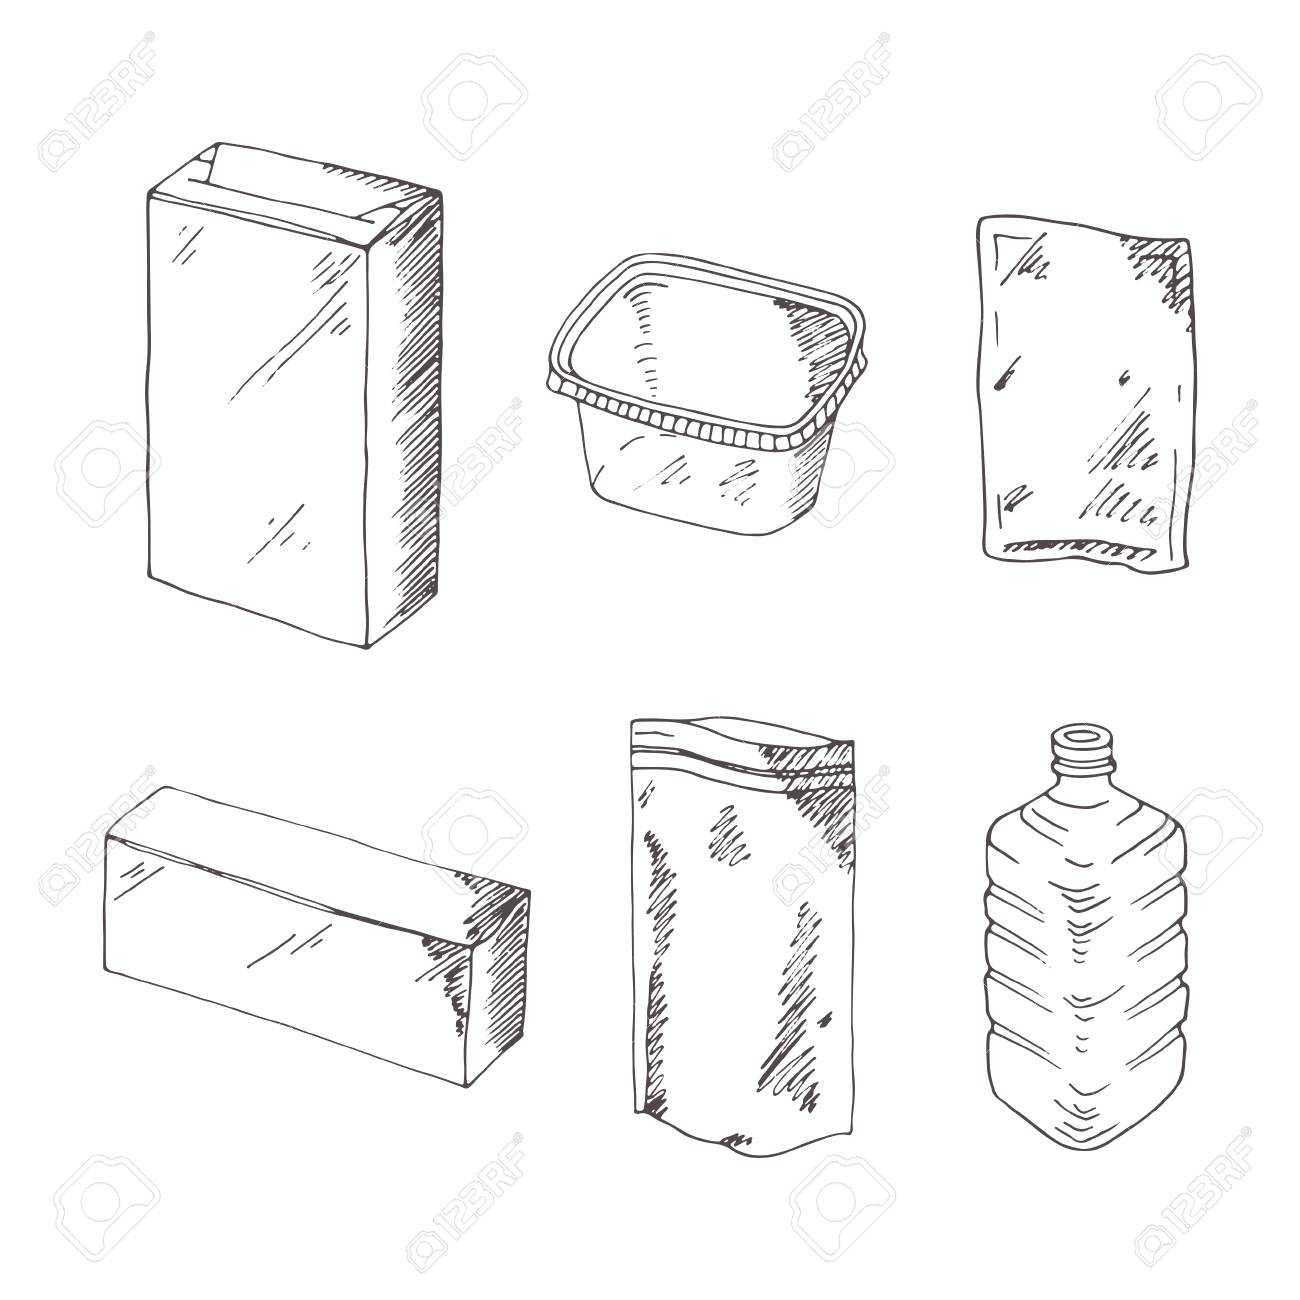 Product Packaging Engraving Set. Mock Up Template Food And Drink.. Intended For Blank Food Web Template